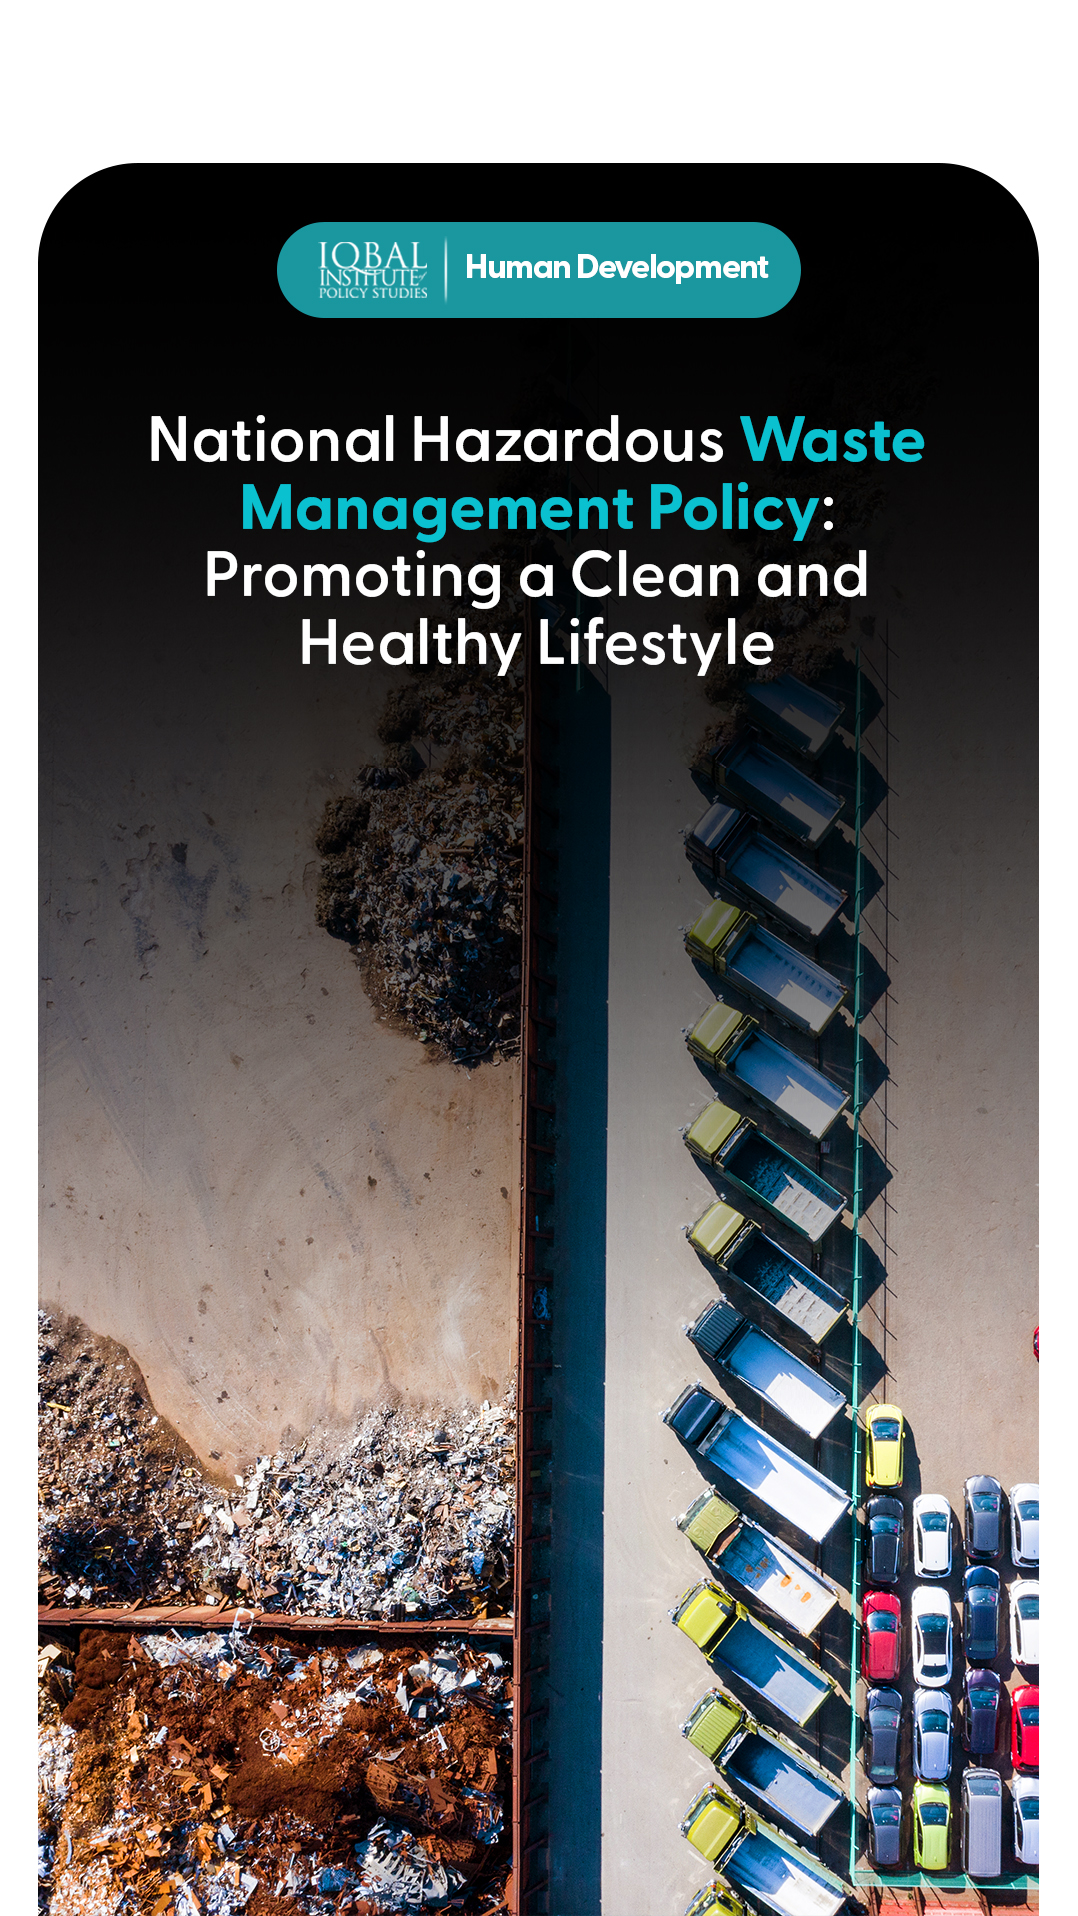 National hazardous waste management policy: promoting a clean and healthy lifestyle